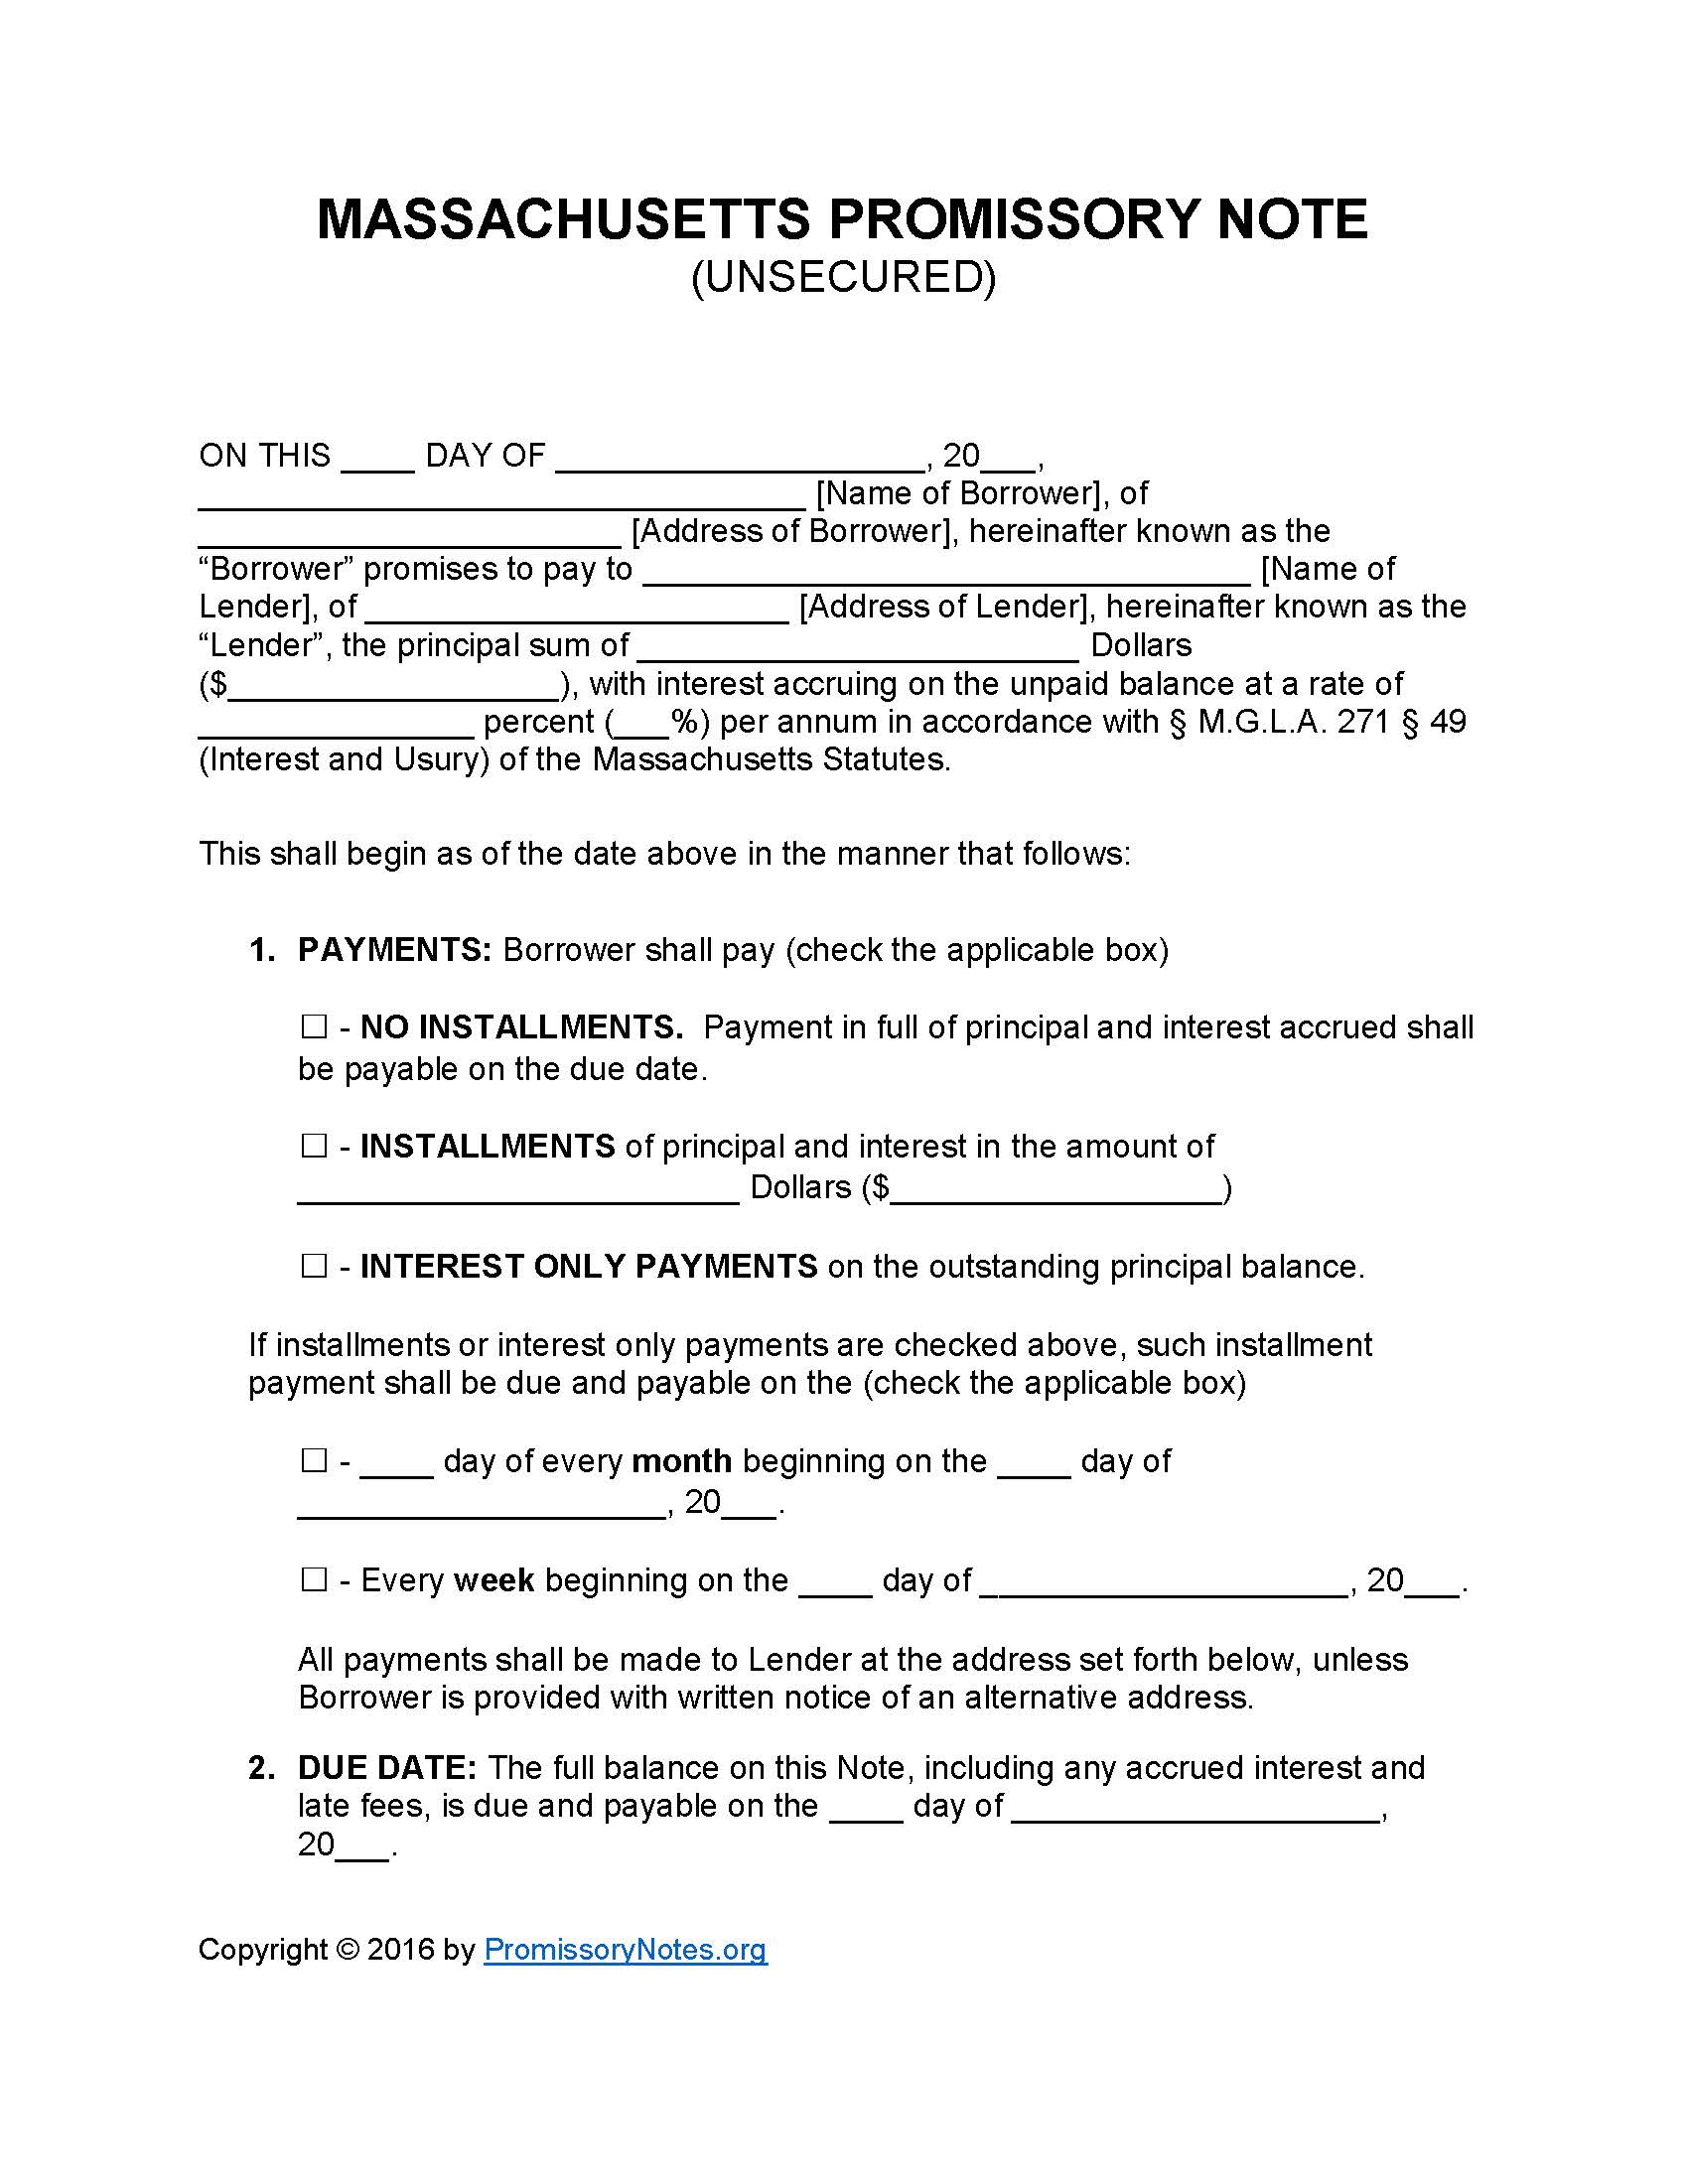 Massachusetts Unsecured Promissory Note Template - Promissory Throughout Unsecured Promissory Note Template